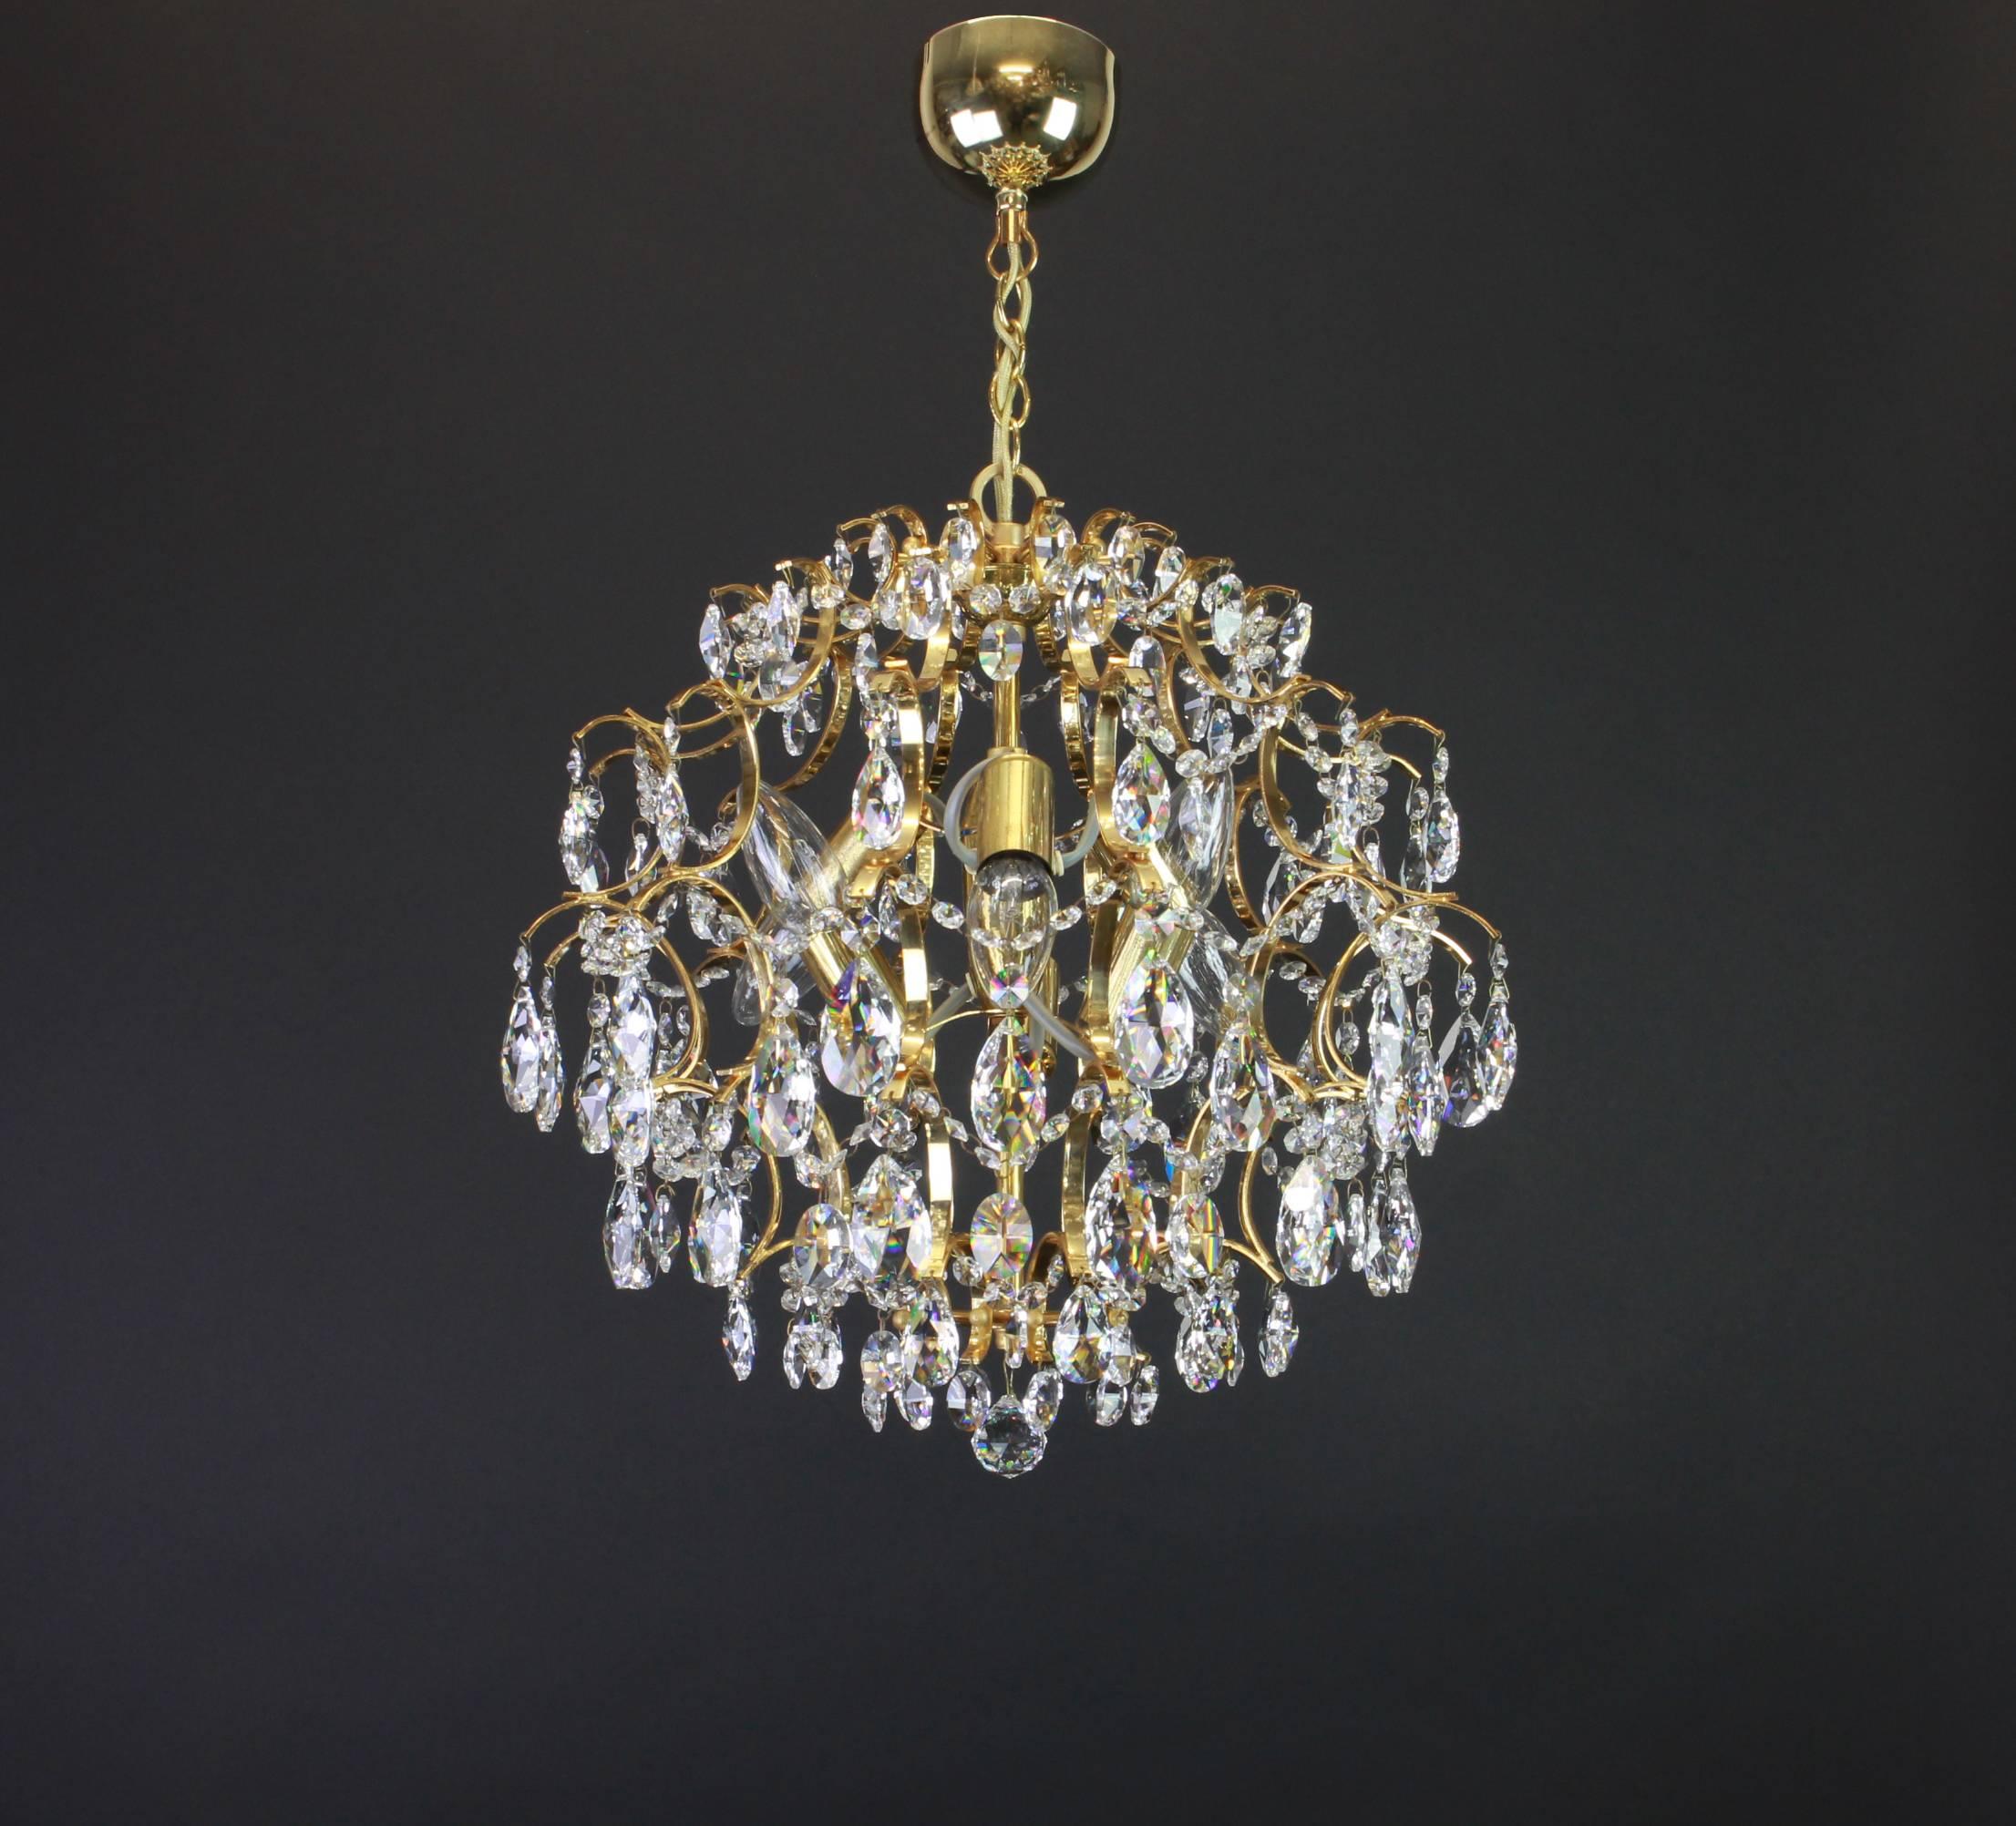 Delicate floral chandelier with crystal glass and gilded brass parts made by Palwa, Germany, 1970s.

Measures: Diameter 40 cm / 16 inch

High quality and in very good condition. Cleaned, well-wired and ready to use. 

The fixture requires 6 x E14